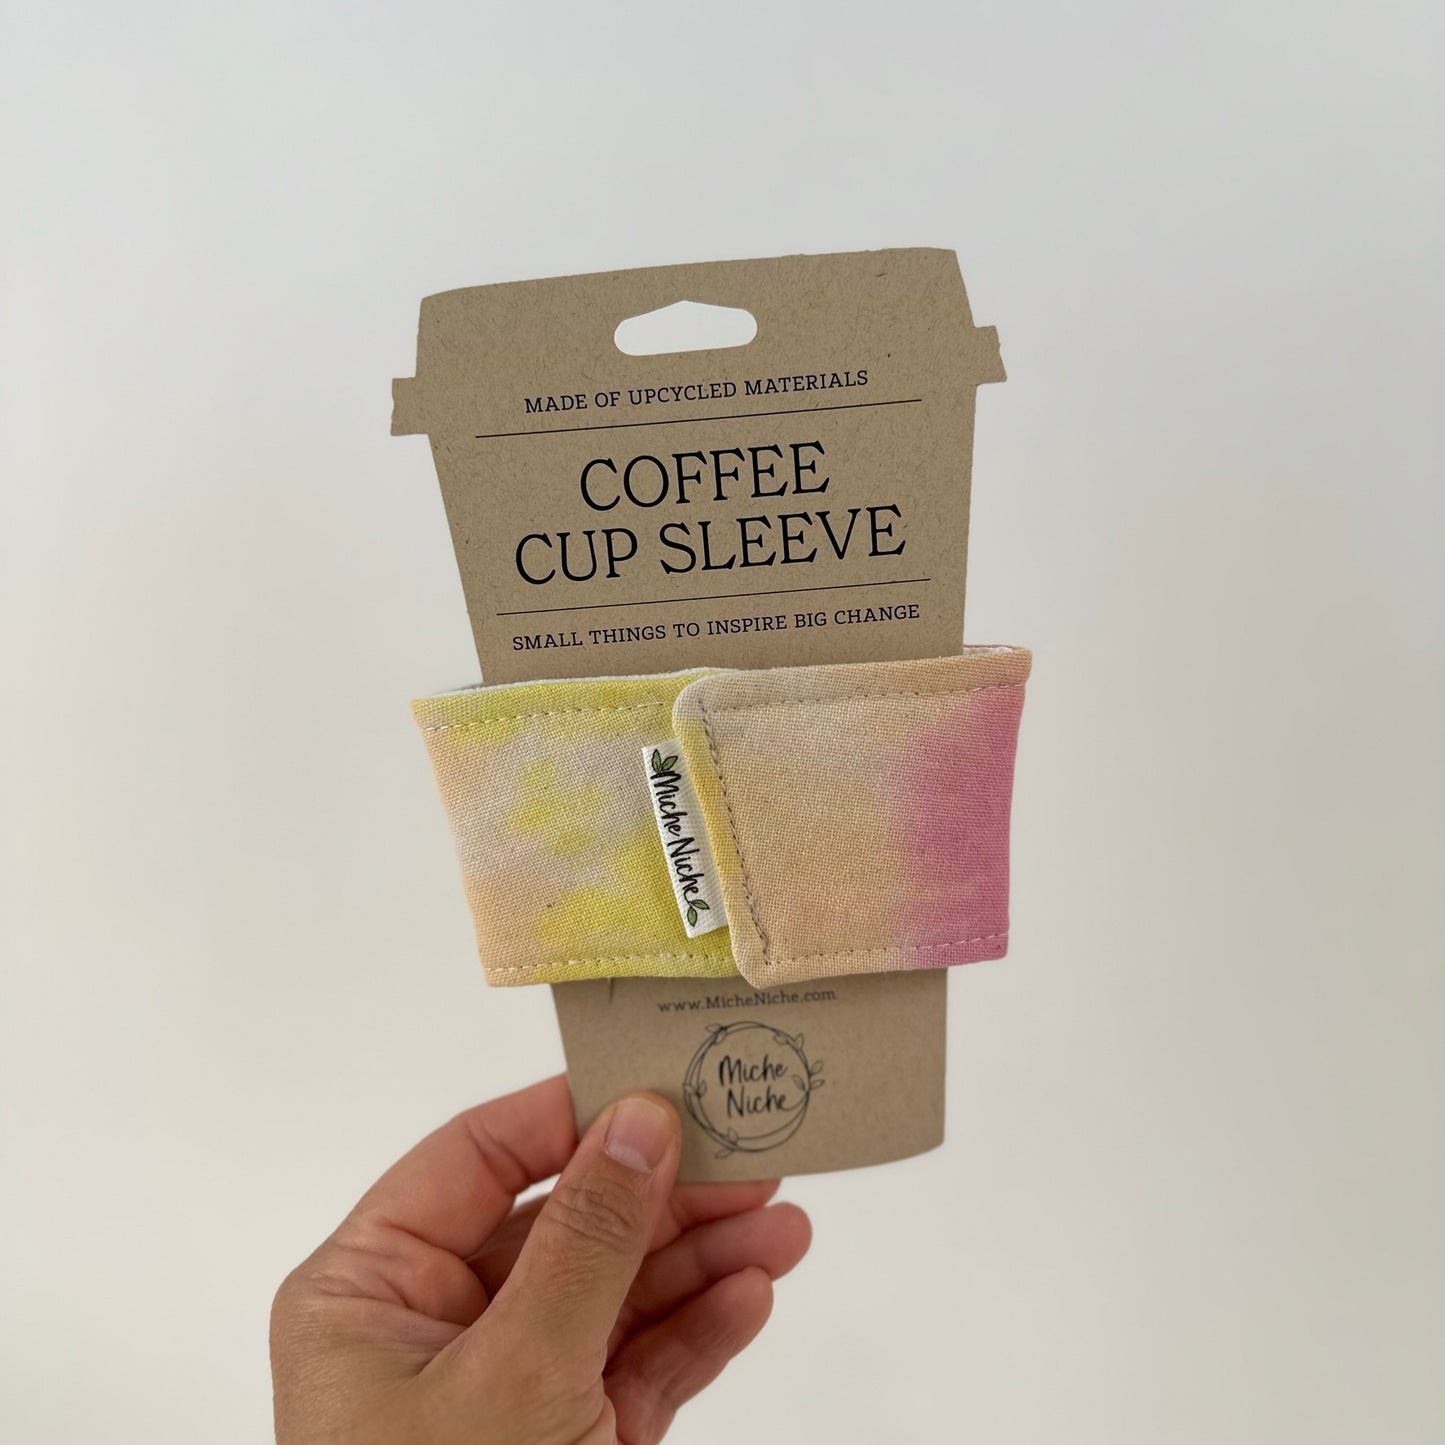 Miche Niche coffee cup sleeve in a hand dyed pastel yellow, green, and pink tie dye pattern